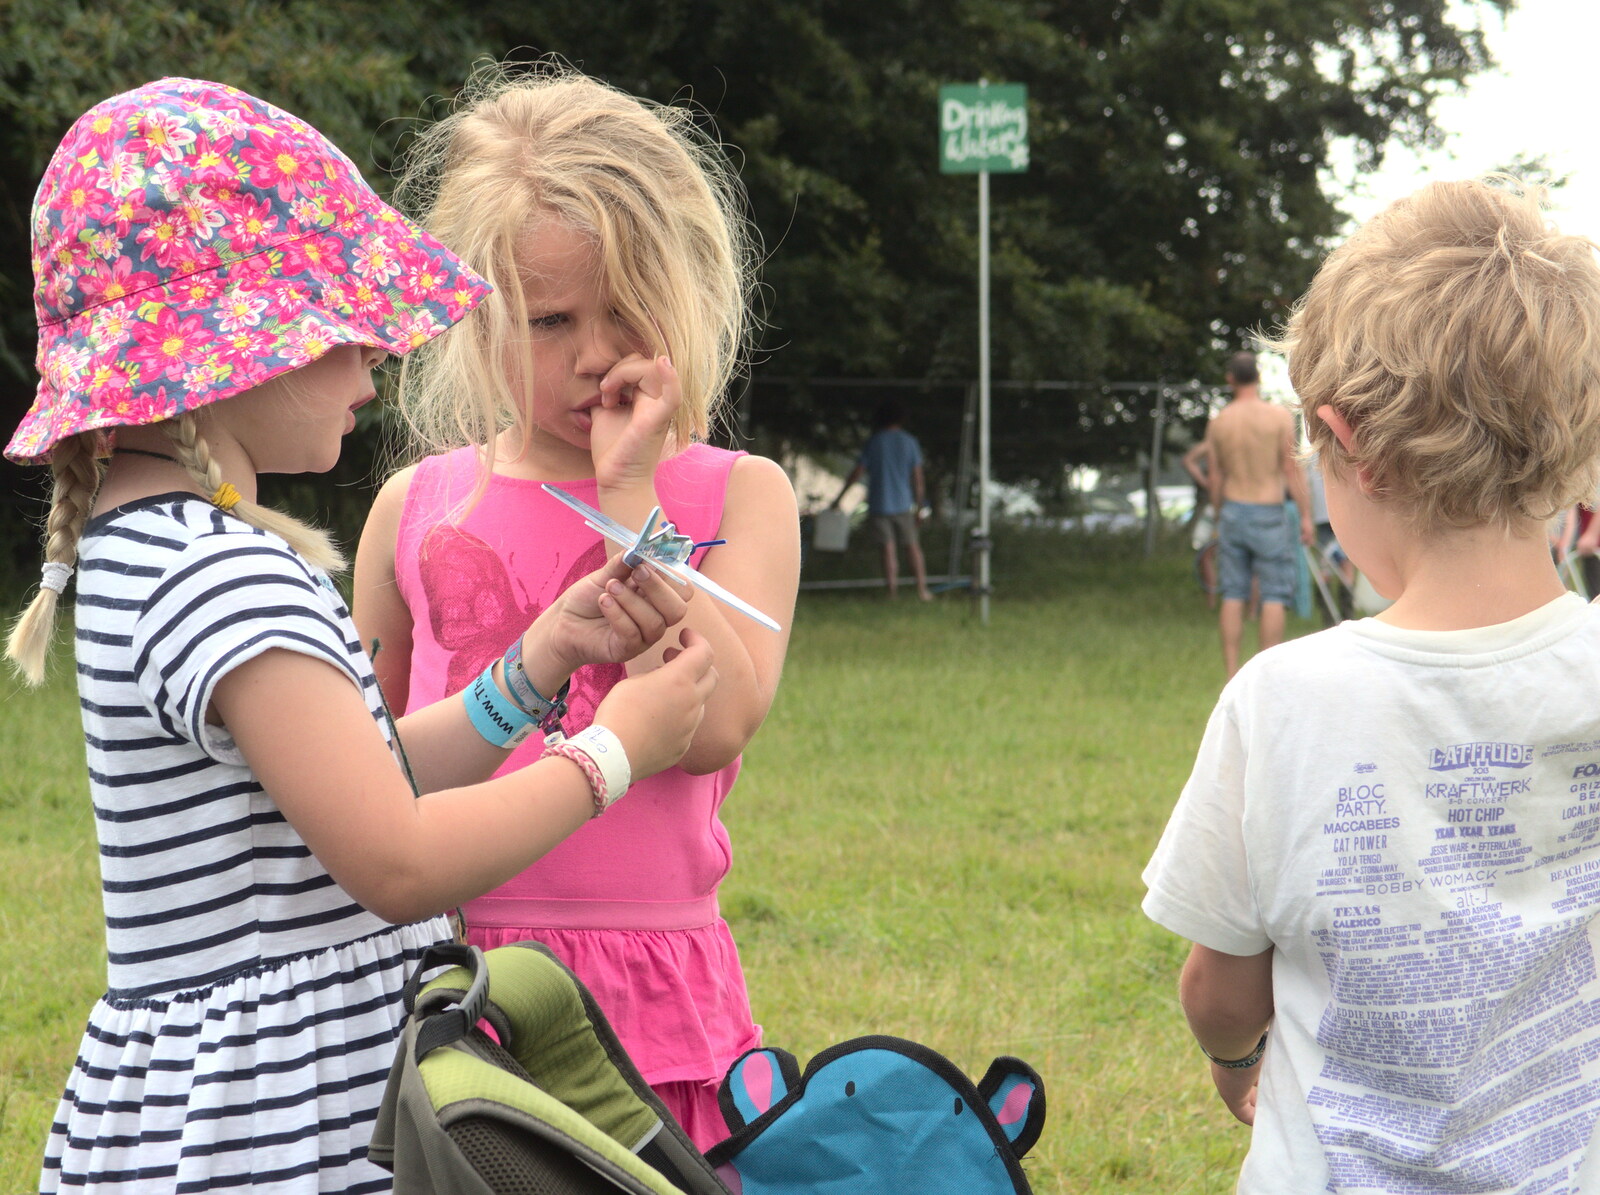 Grace, Alice and Fred fly model aircraft around from Latitude Festival, Henham Park, Southwold, Suffolk - 17th July 2014